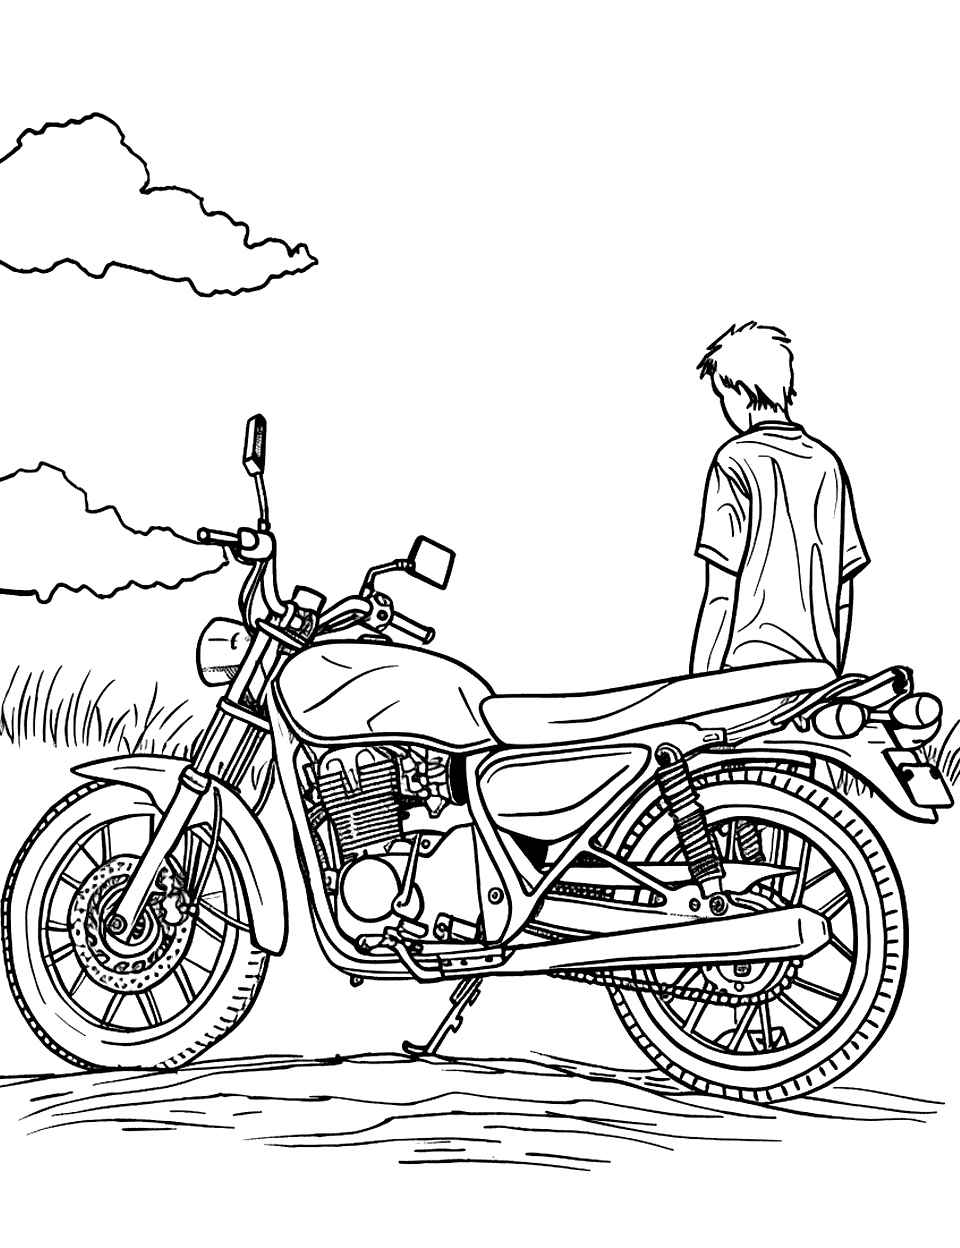 Man and His Motorcycle Coloring Page - A man standing next to his motorcycle, looking at the horizon.